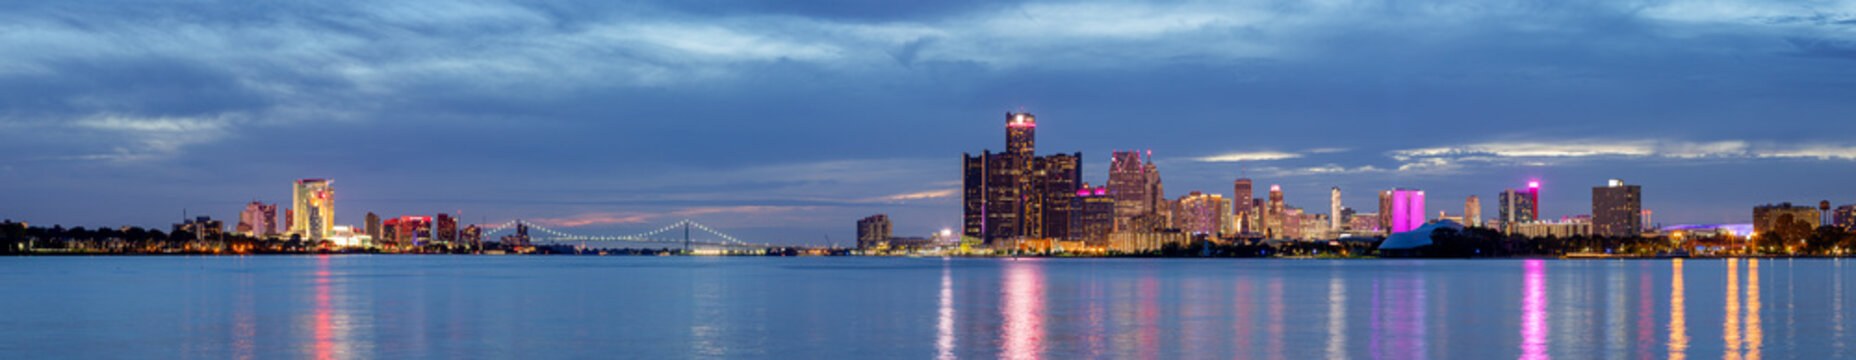 The Cities of Detroit and Windsor